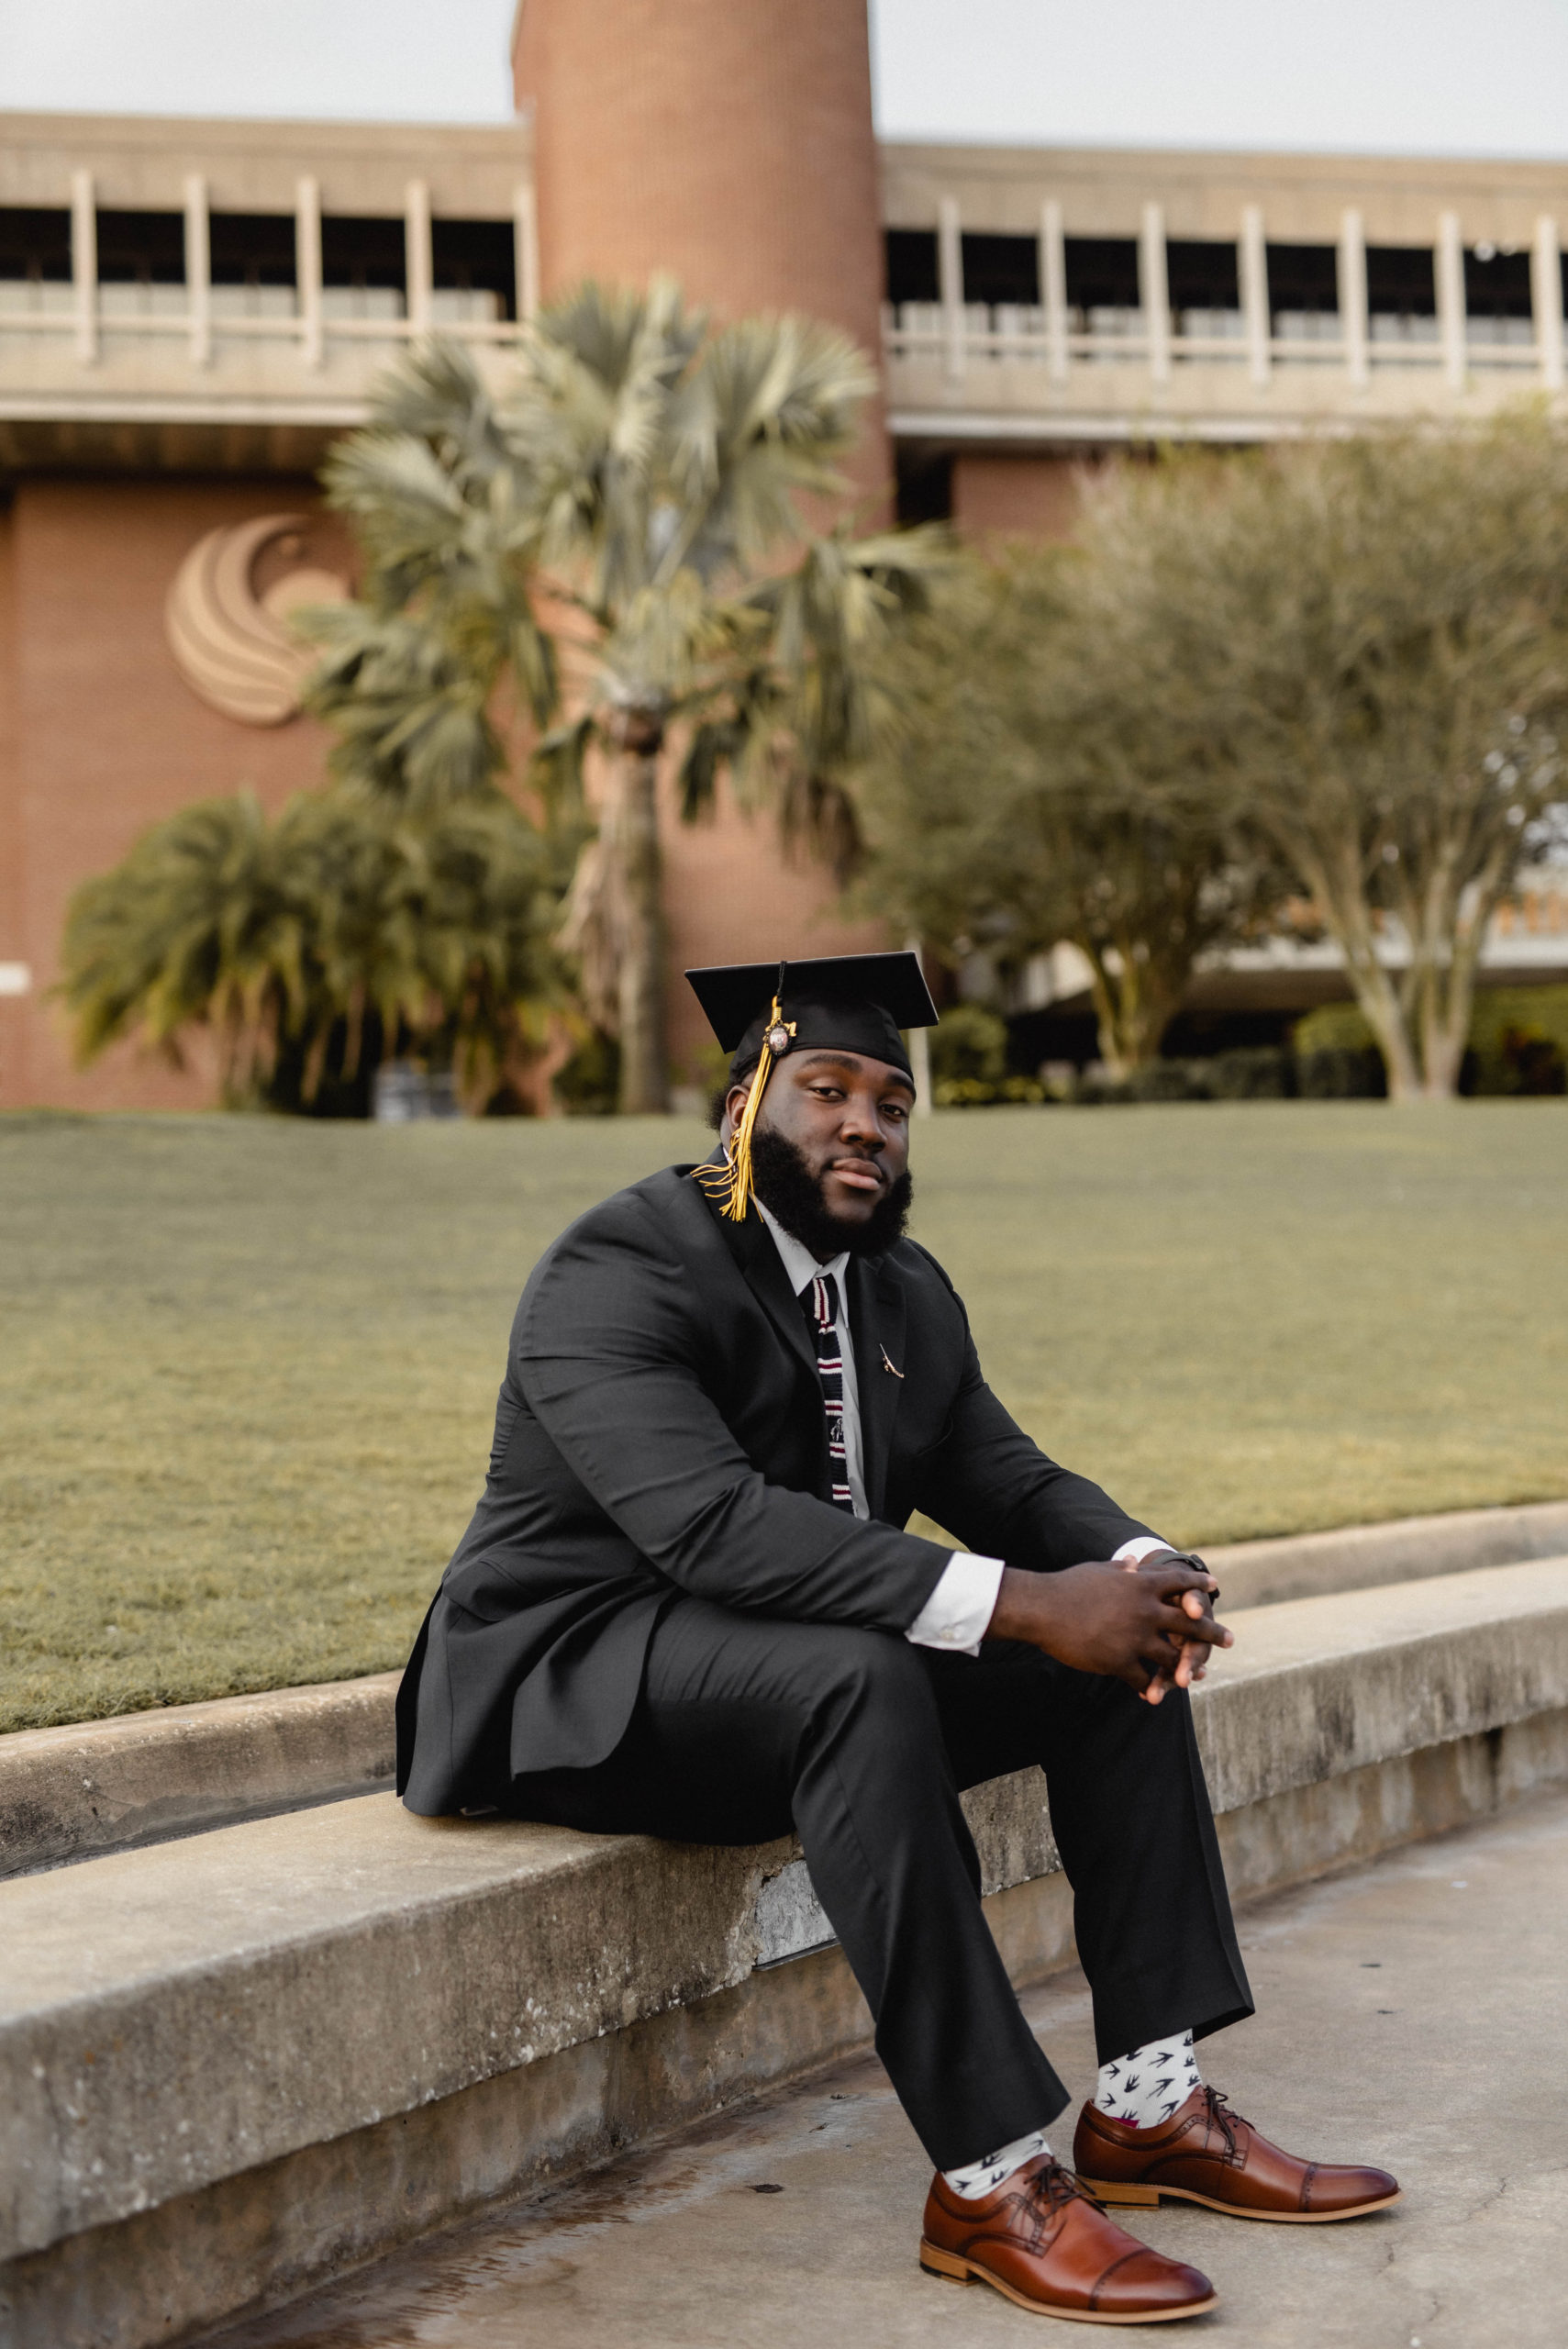 ucf orlando graduation photographer local packages